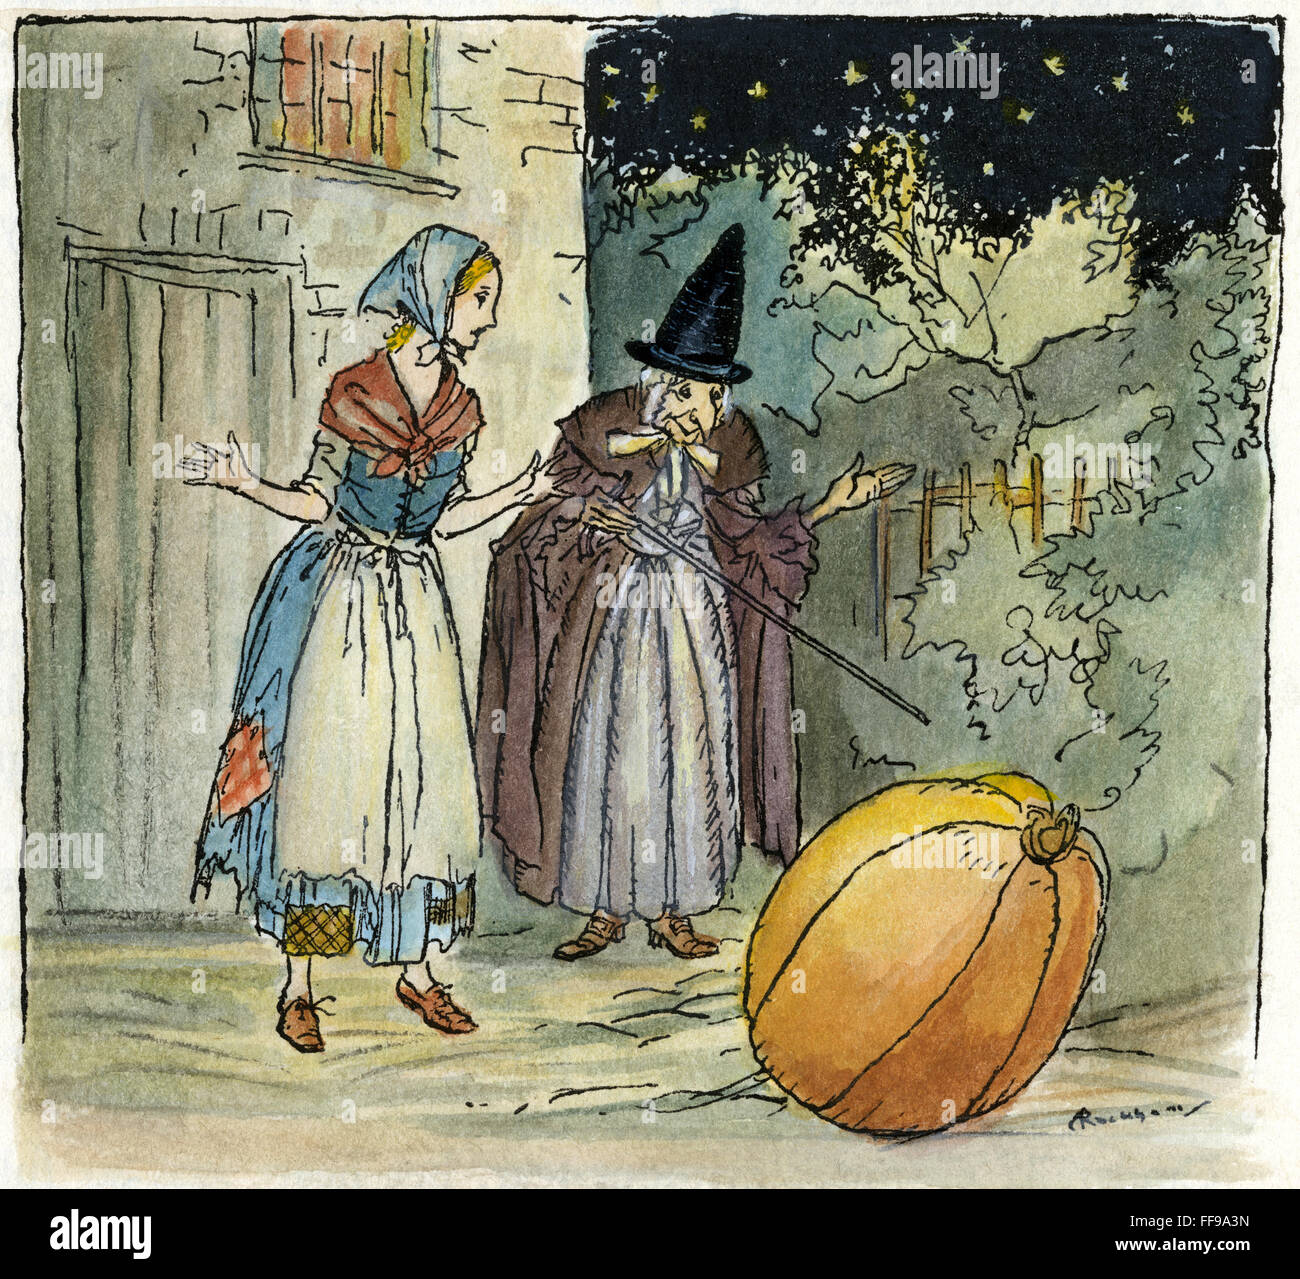 PERRAULT: CINDERELLA, C1920.  /nCinderella's fairy godmother turns a pumpkin into a carriage. Pen-and-ink drawing by Arthur Rackham for the fairy tale by Perrault, c1920. Stock Photo